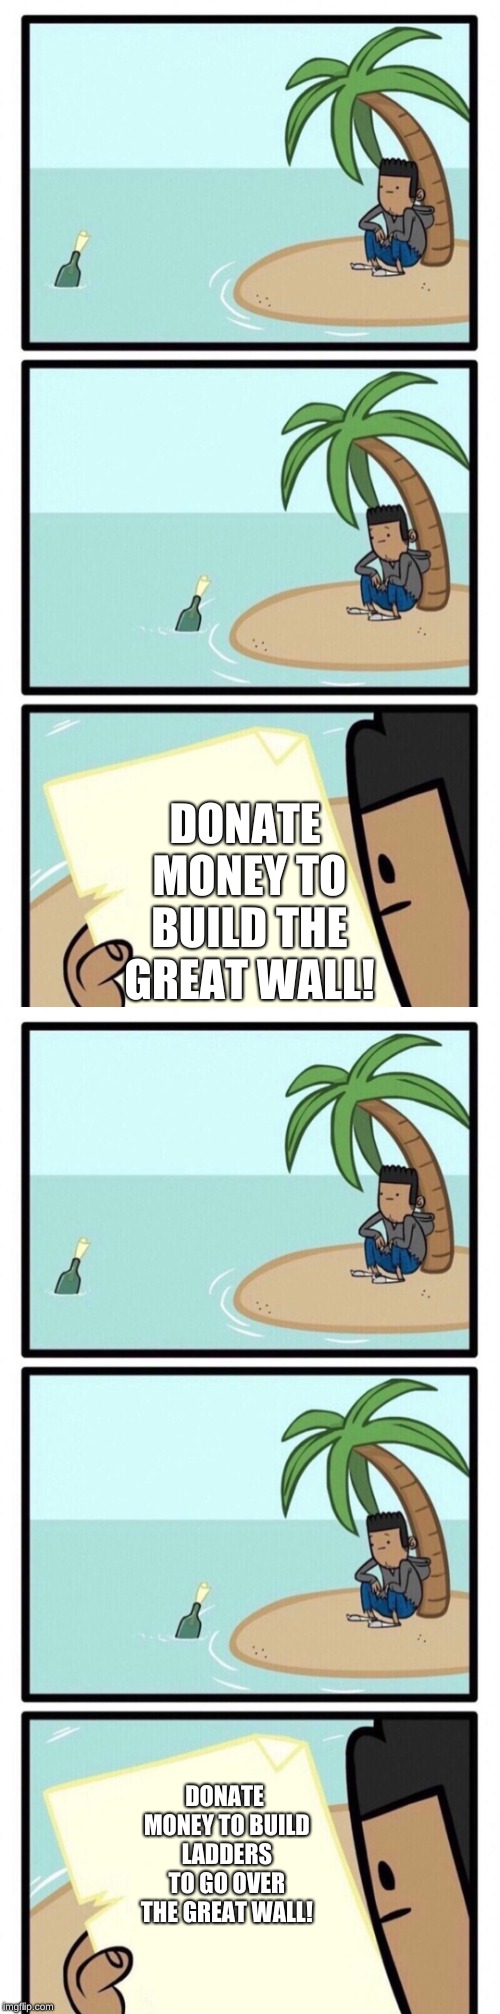 Meant as a joke, not a political meme. | DONATE MONEY TO BUILD THE GREAT WALL! DONATE MONEY TO BUILD LADDERS TO GO OVER THE GREAT WALL! | image tagged in memes,message in a bottle | made w/ Imgflip meme maker